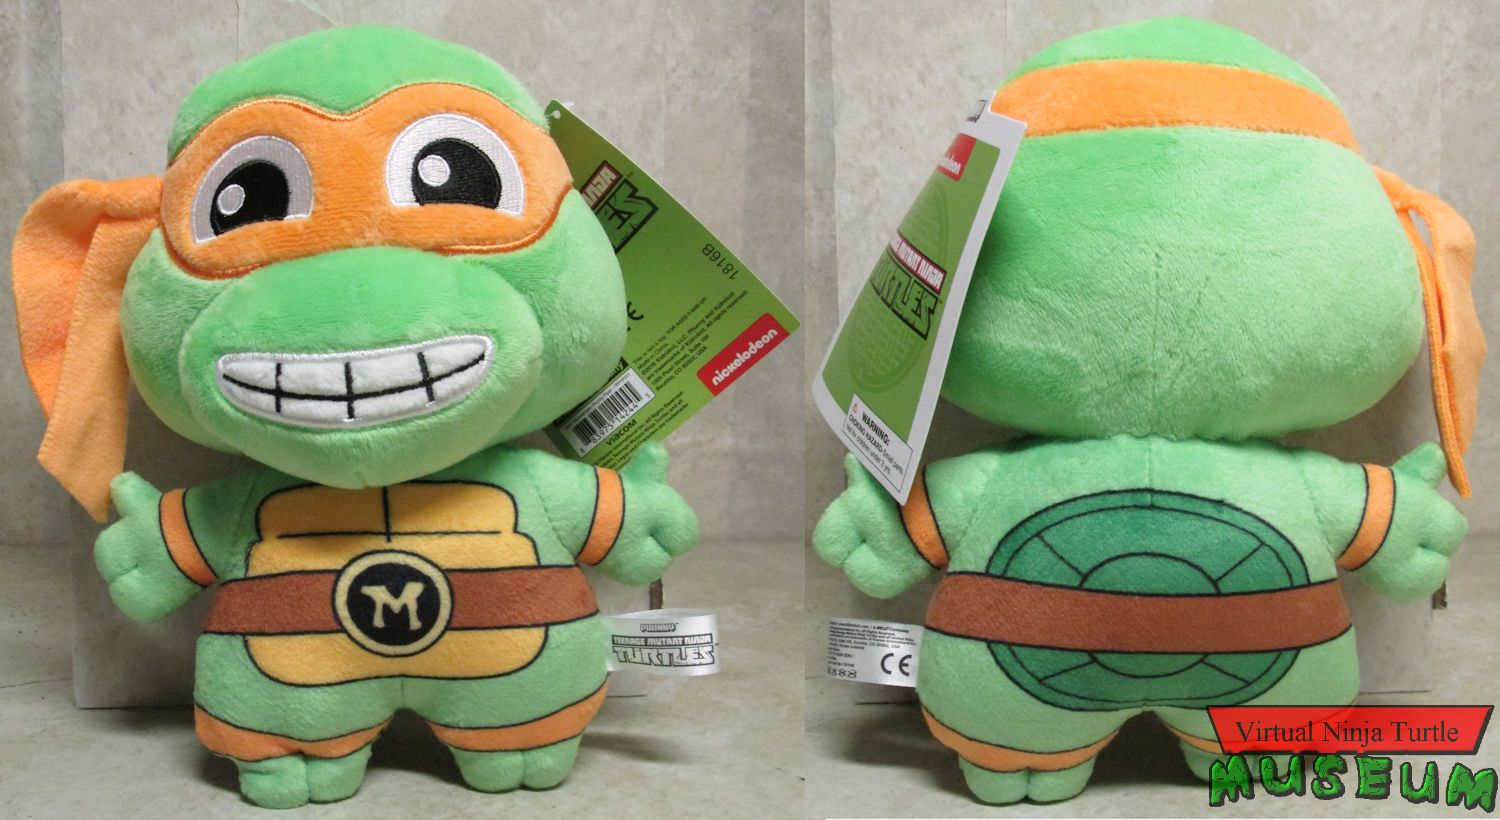 Michelangelo Phunny front and back